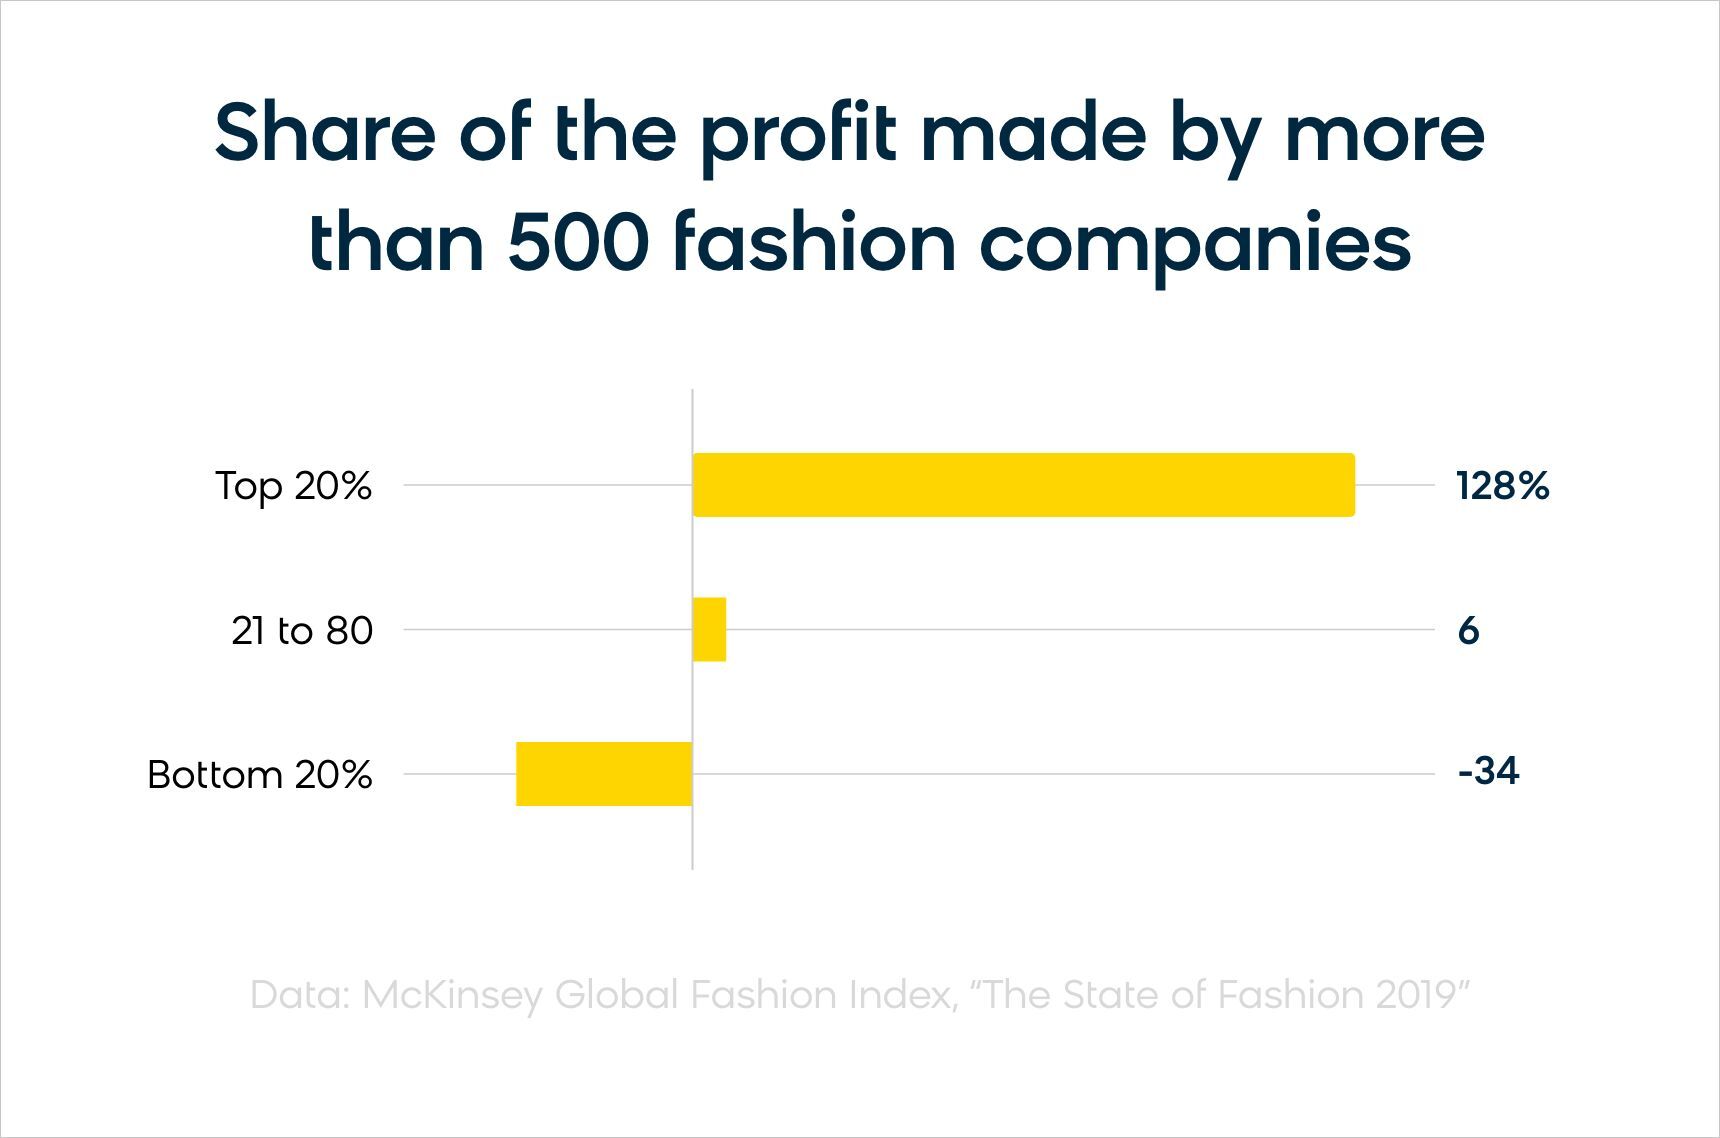 The McKinsey Global Fashion Index found that the top 20% of fashion businesses generated 144% of the industry’s profits.